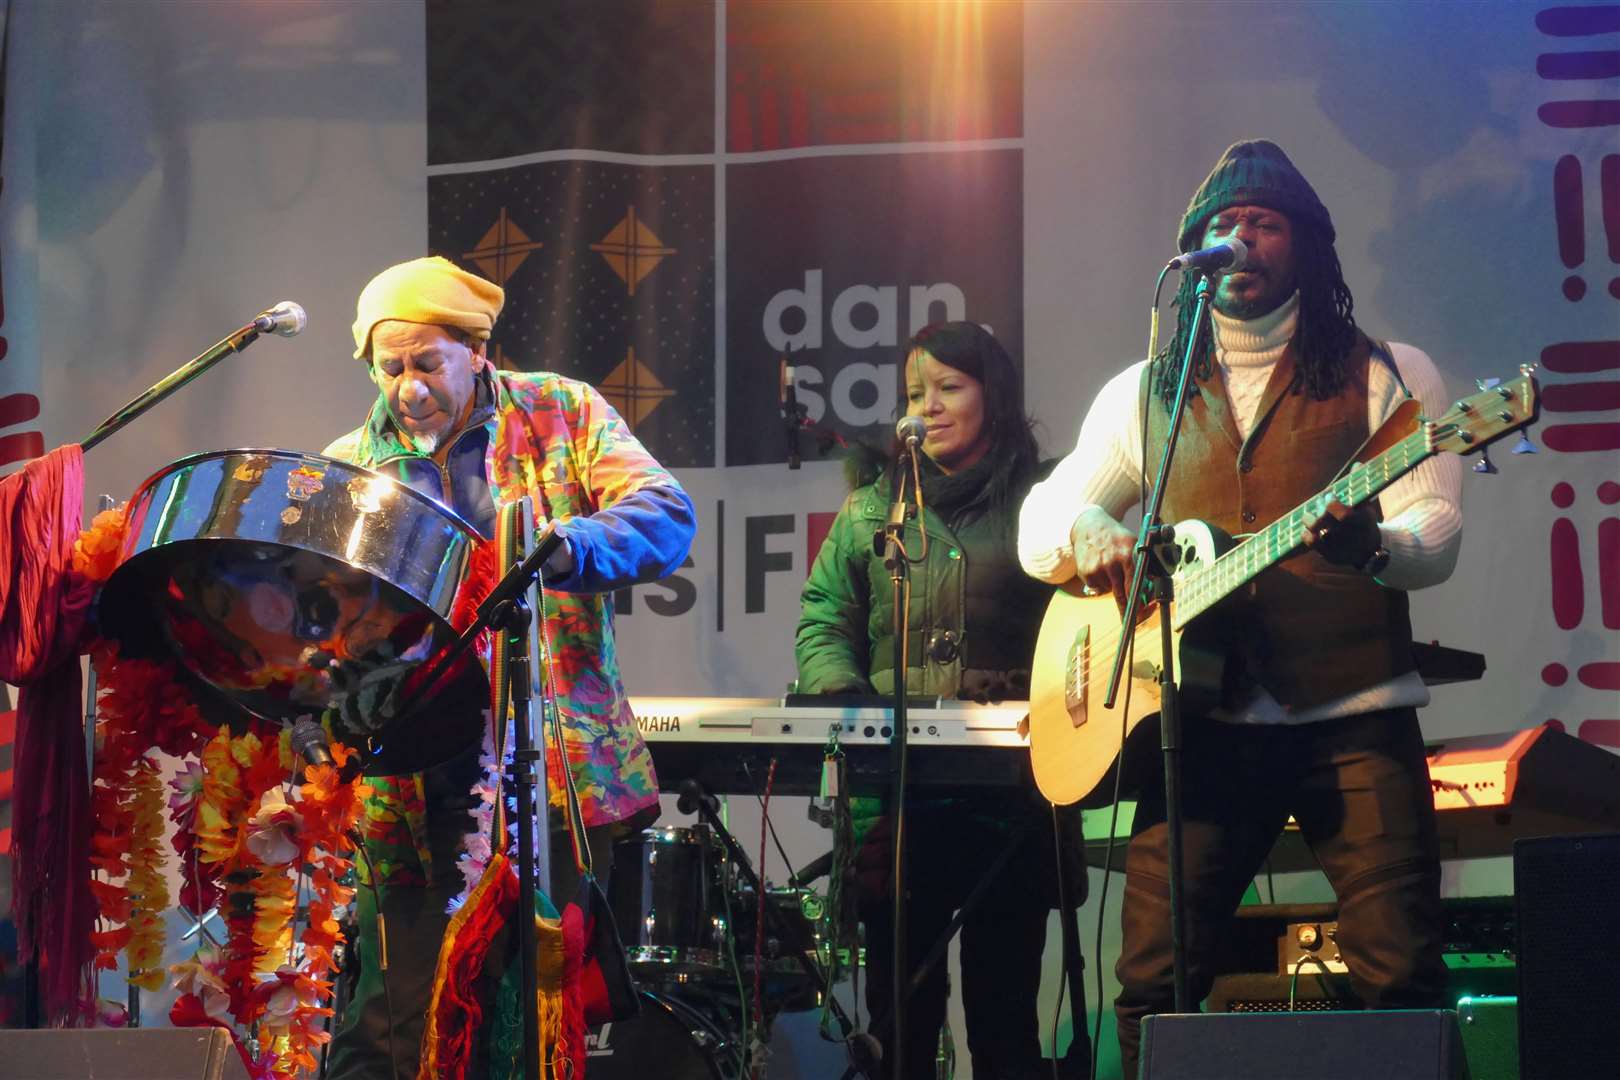 DansFEST attracted a large number of performers adding to the party atmosphere at Elwick Place. Picture: Andy Clark